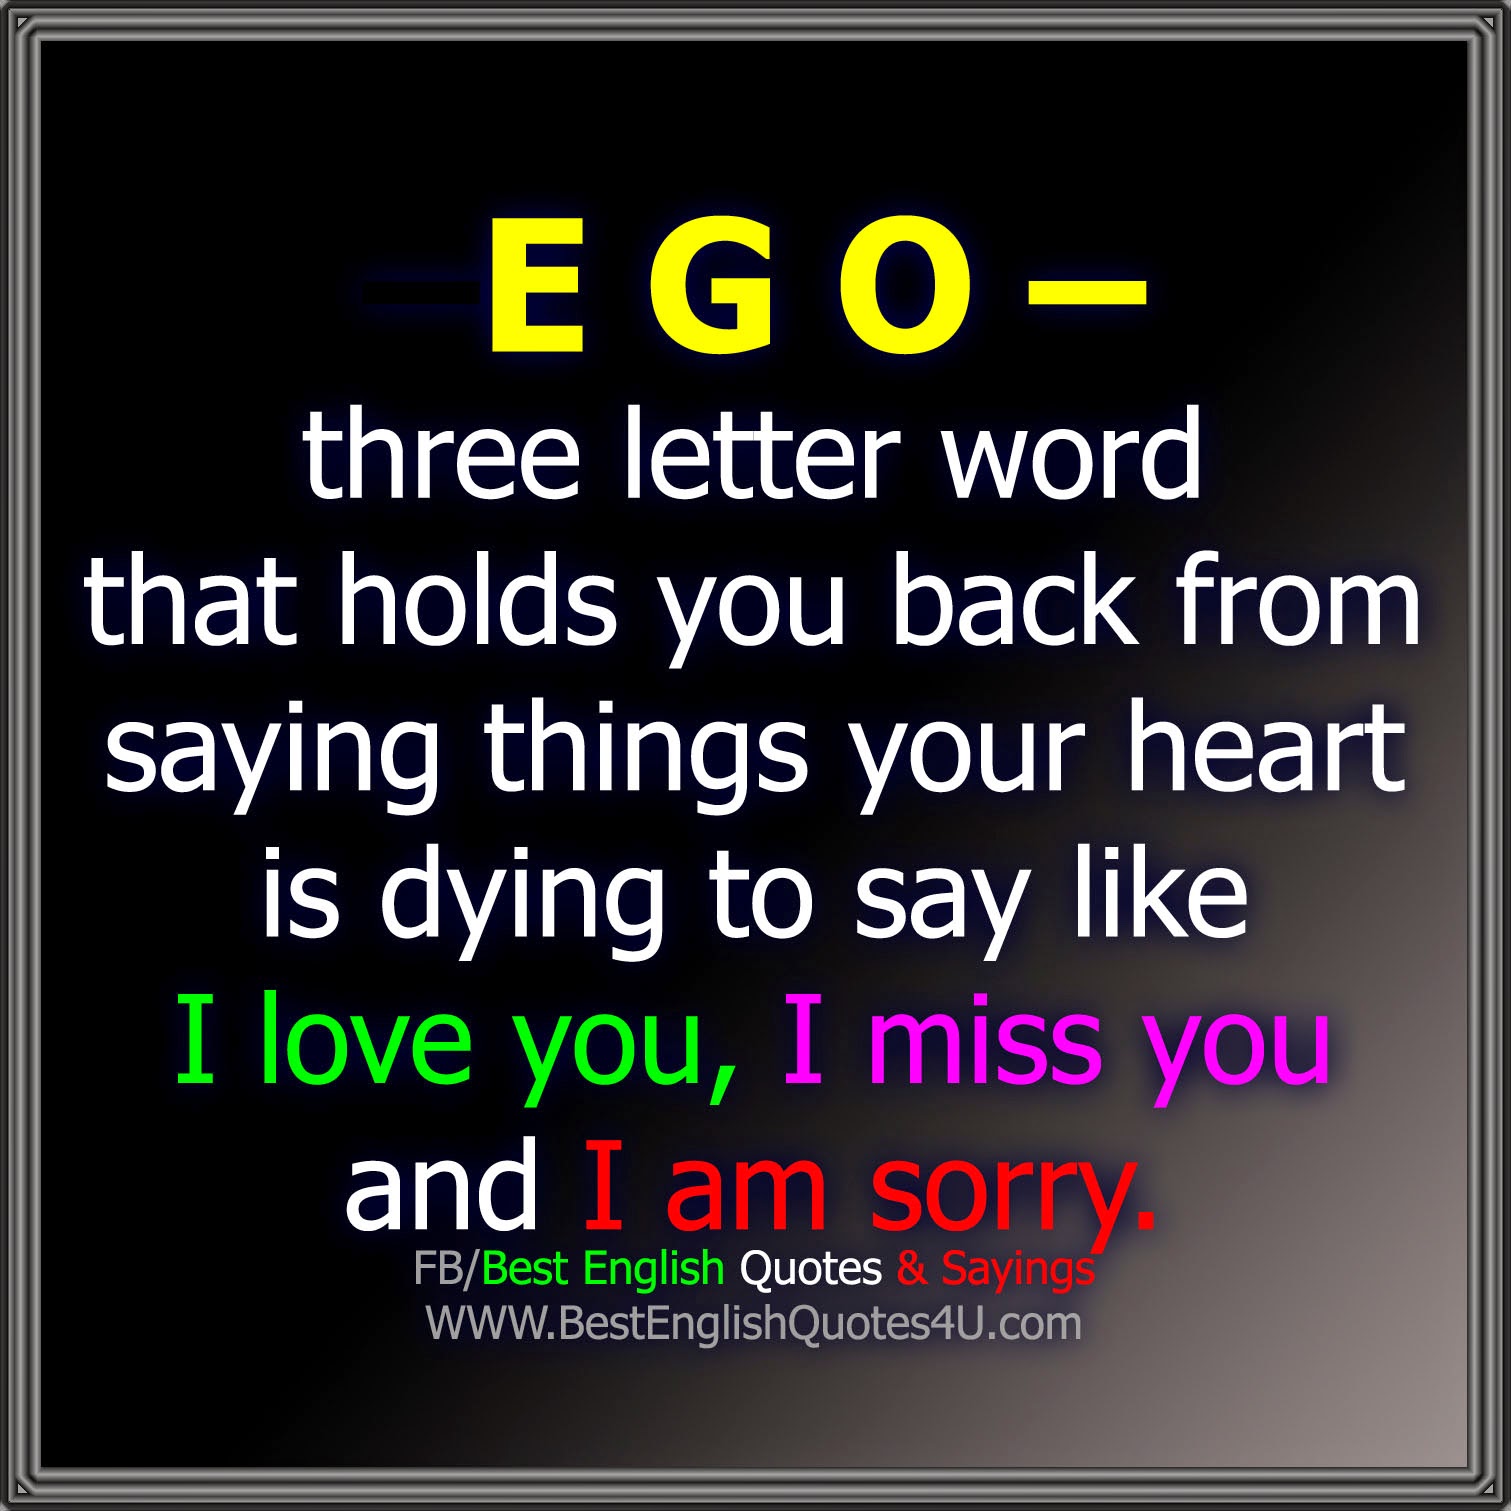 E G O – three letter word that holds